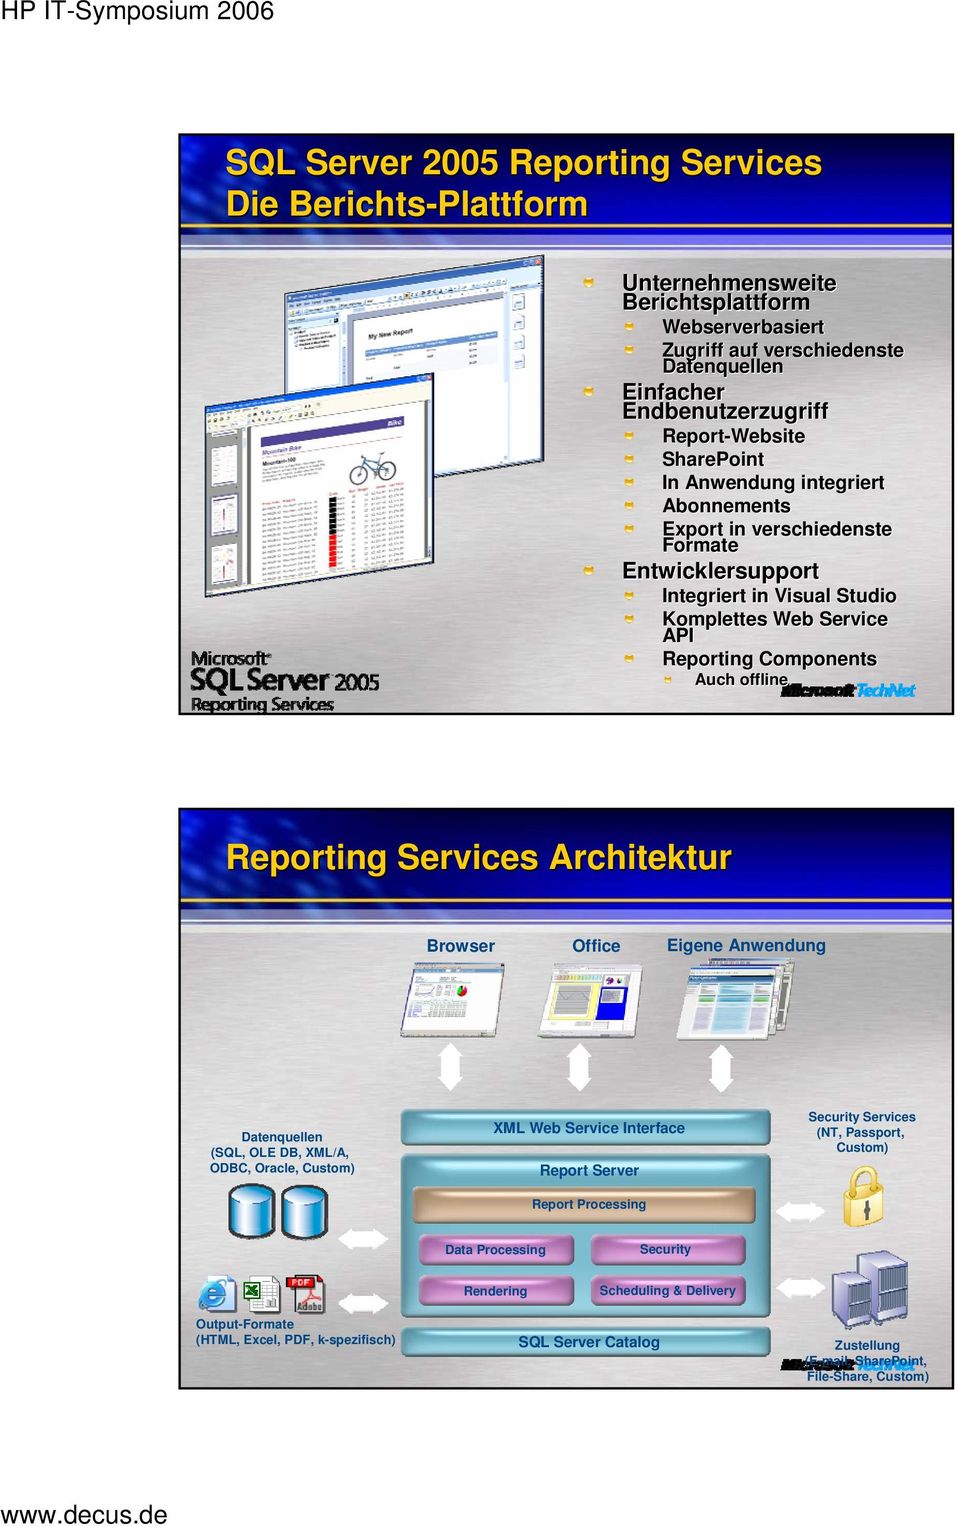 offline Reporting Services Architektur Browser Office Eigene Anwendung Datenquellen (SQL, OLE DB, XML/A, ODBC, Oracle, Custom) XML Web Service Interface Report Server Report Processing Security